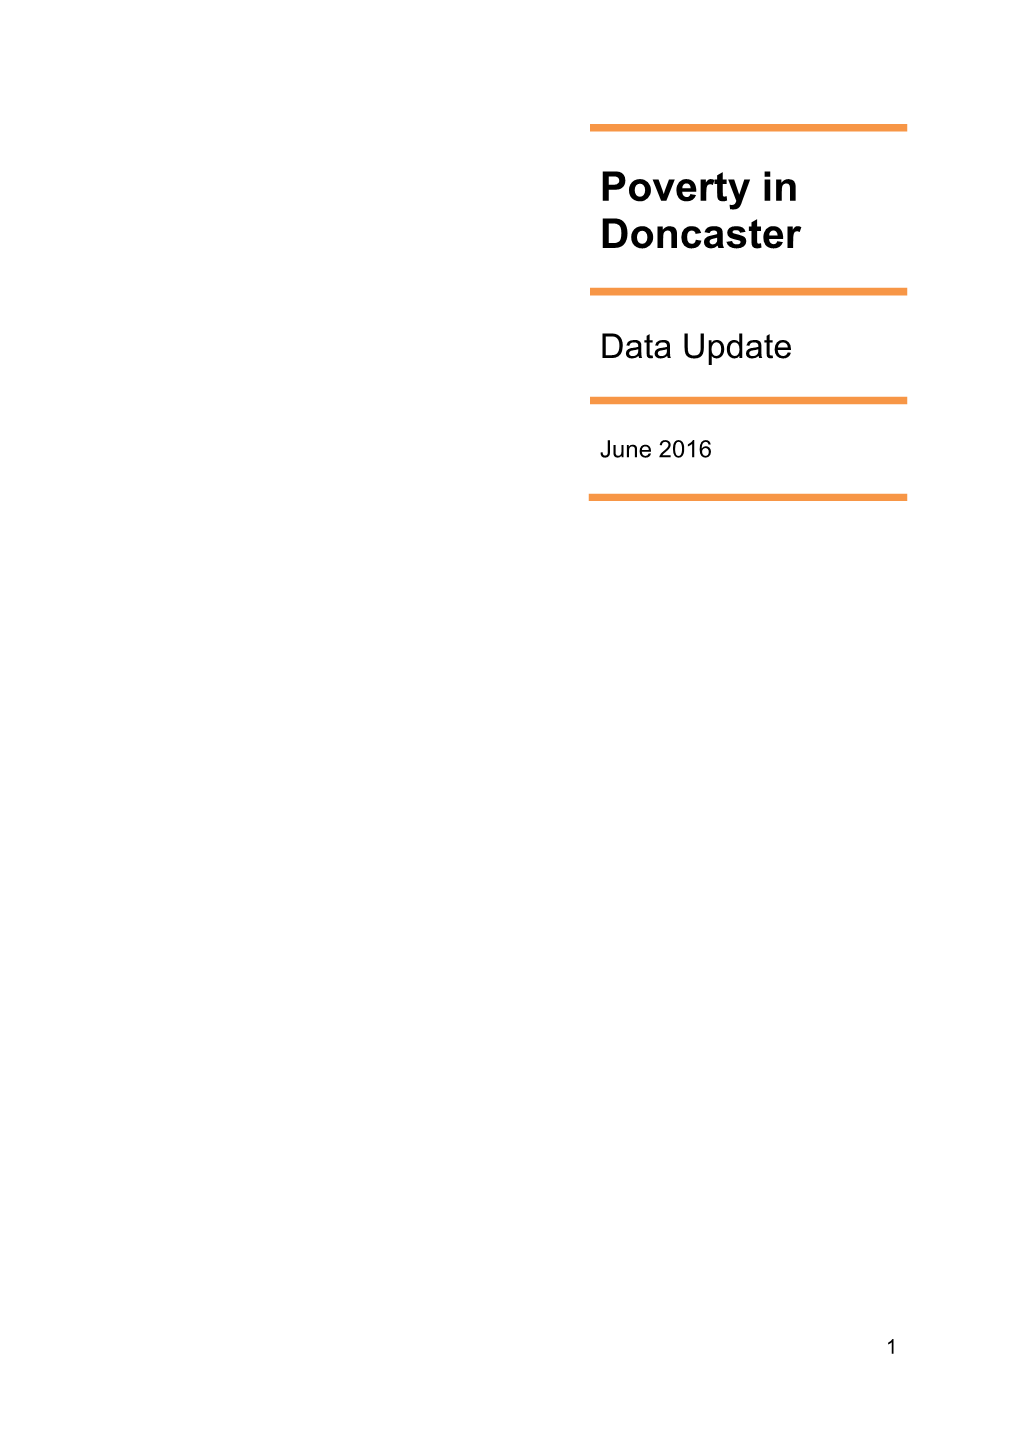 Poverty in Doncaster